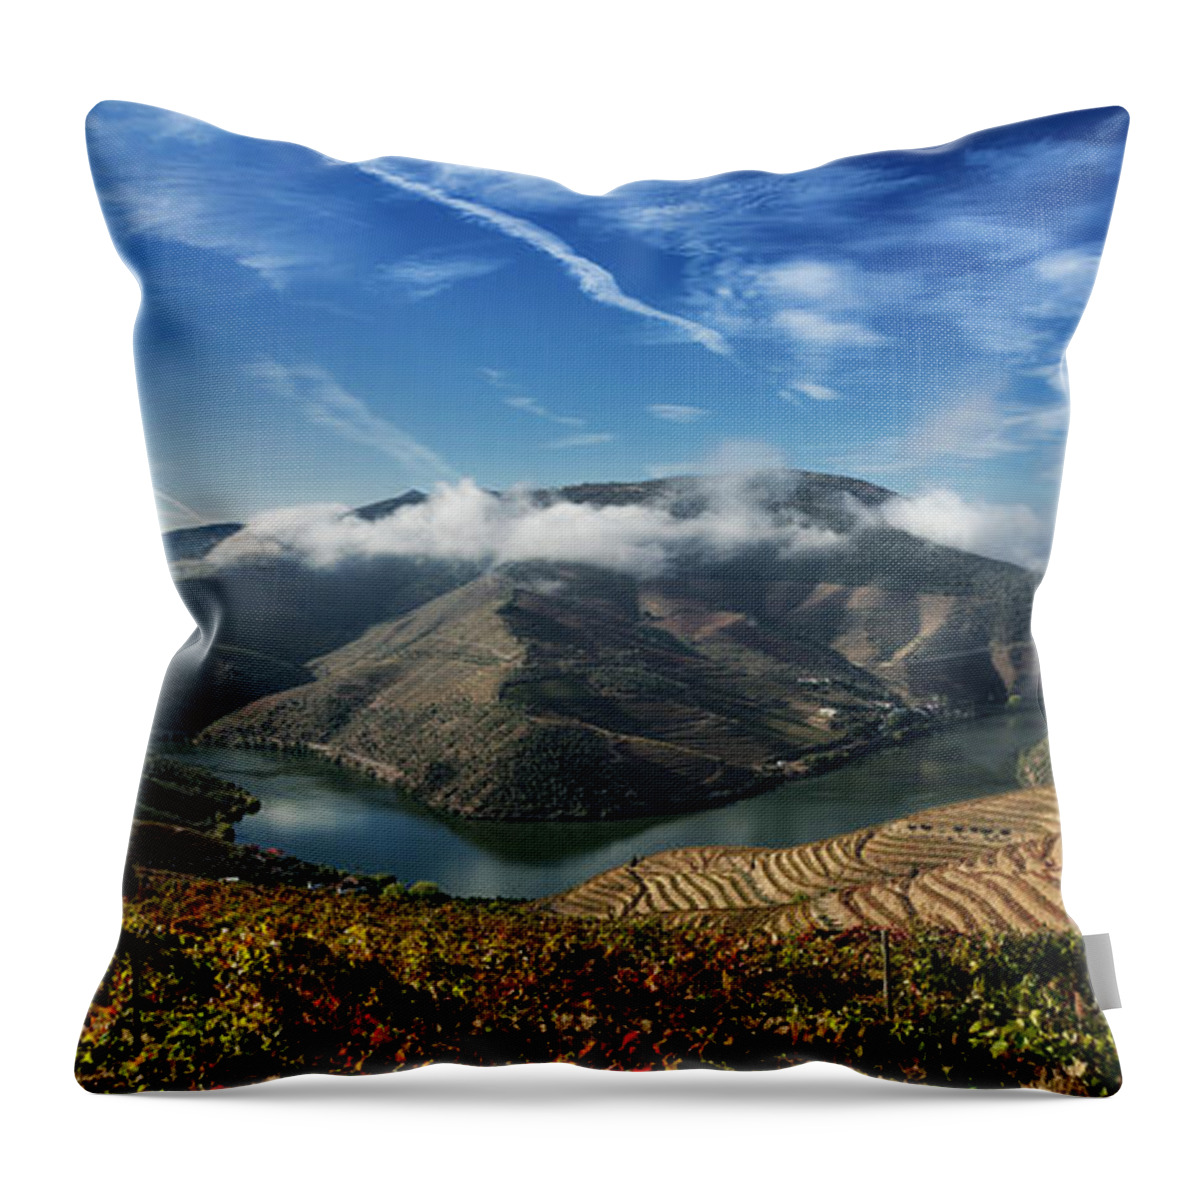 Bragança District Throw Pillow featuring the photograph Douro River by Abelc.